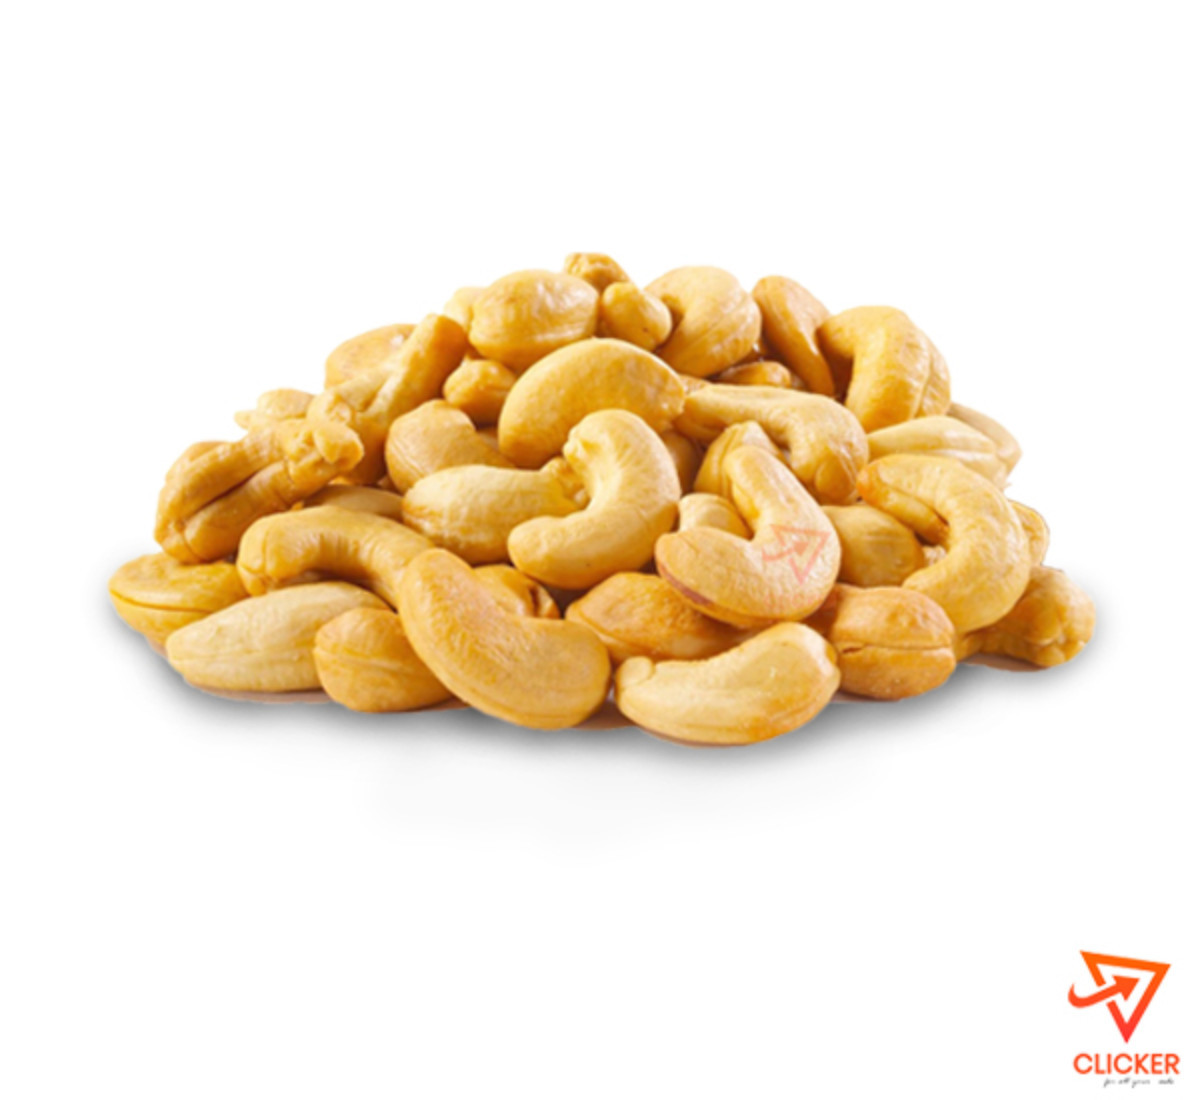 Clicker product 50G CASHEW PACK 2850